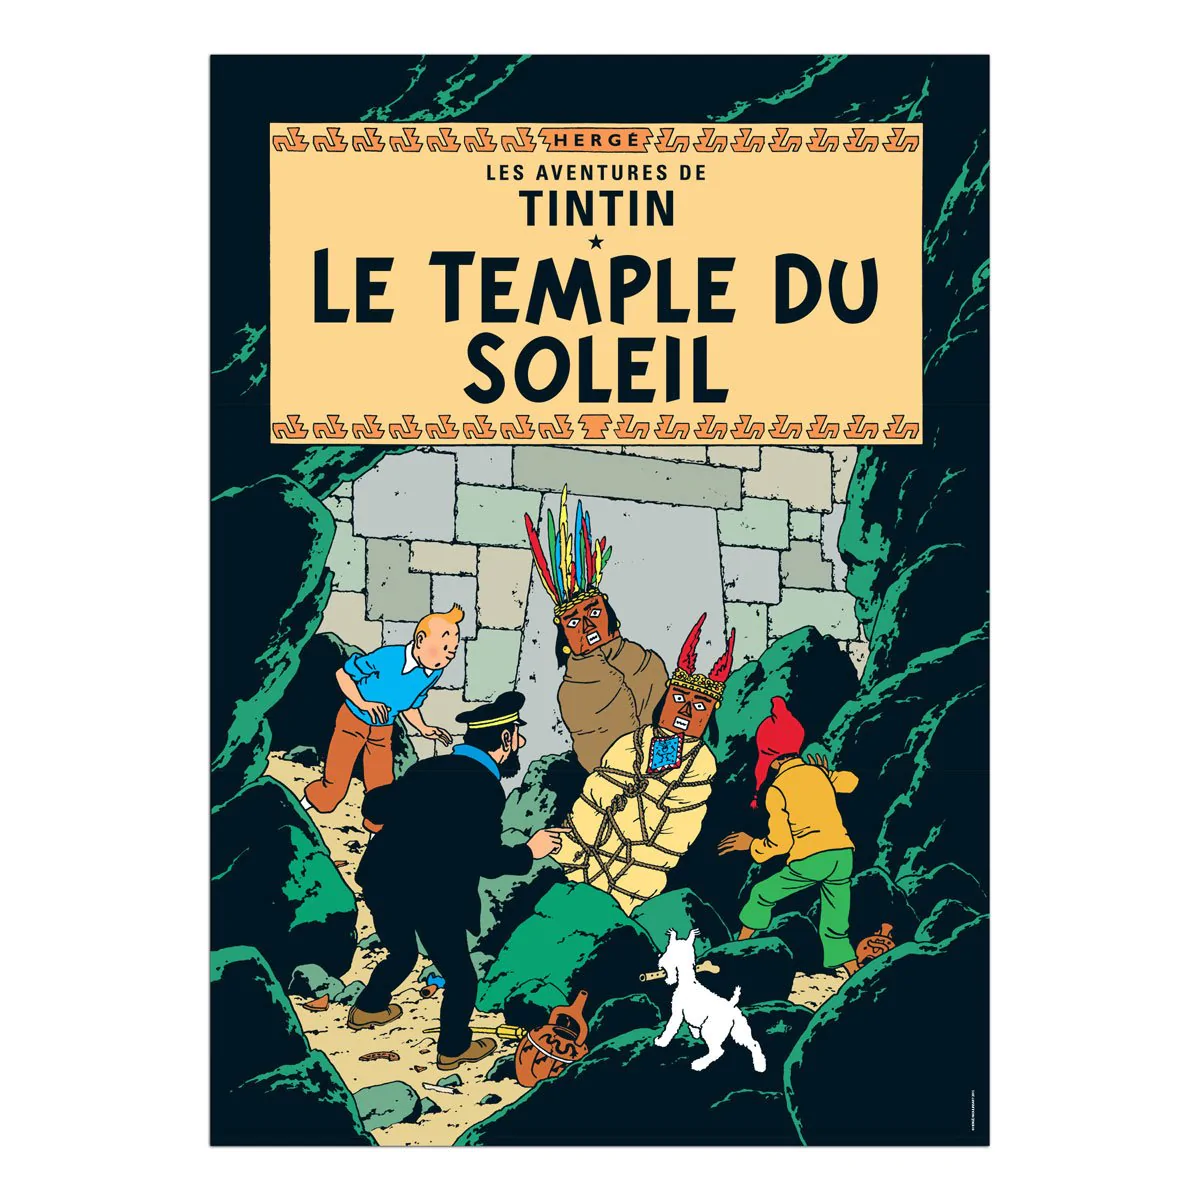 Tintin Posters - Prisoners of the Sun - Tintin - Brand_Tintin - Collectibles - Home_Decor - Home_French Nostalgia - Tintin - posters-fr-2015-14_1200PrisonersoftheSunPrisonersoftheSun